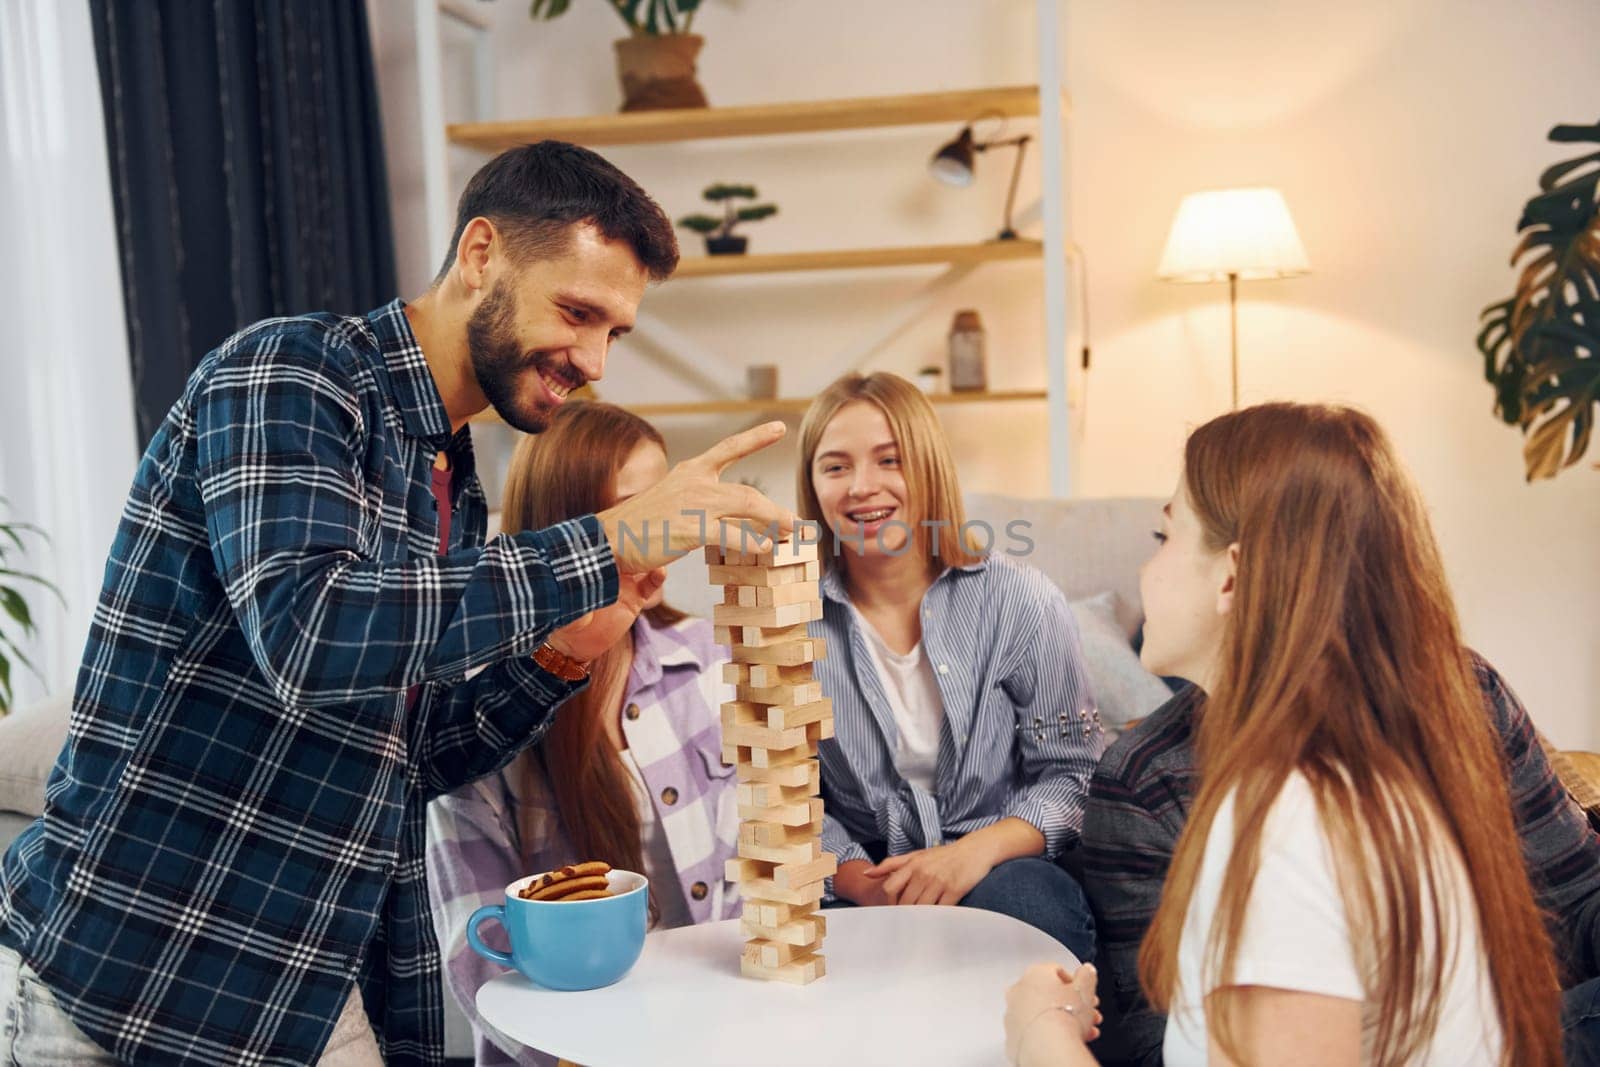 Wooden tower game on the table. Group of friends have party indoors together.